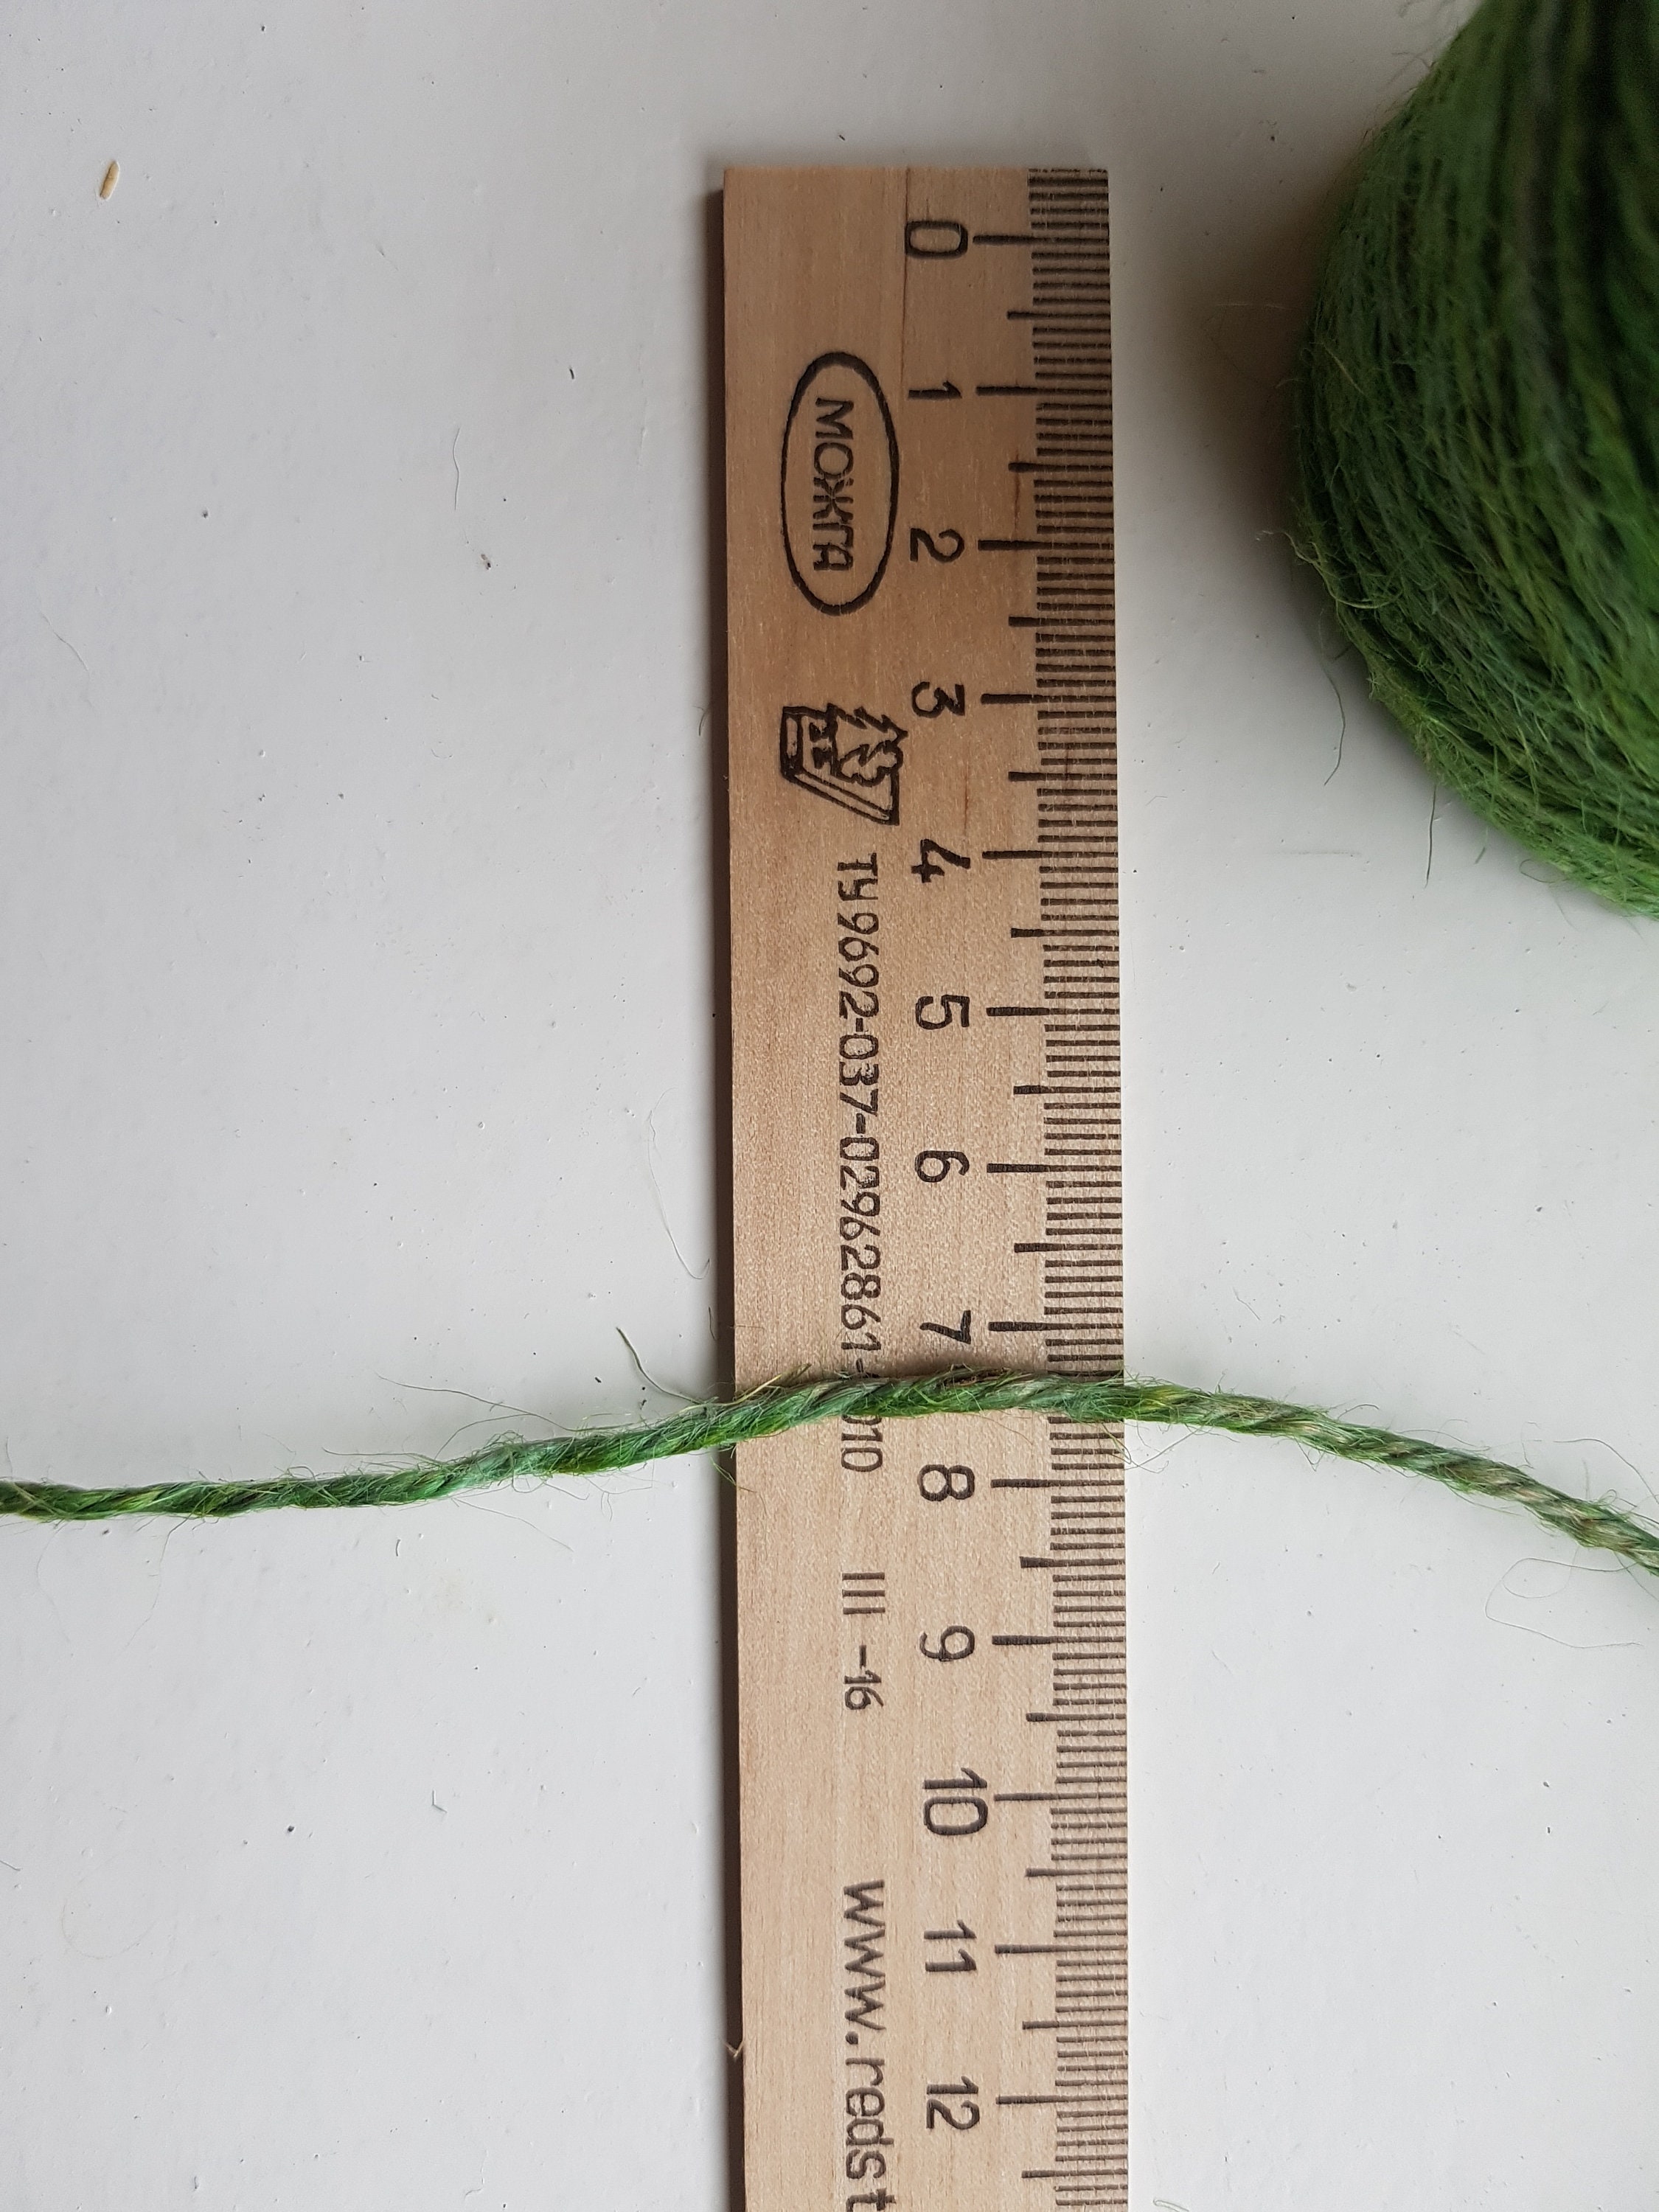 Cord Cotton 1.5 Mm/1630 M Natural Twisted Yarn Tools for Crafts Macrame 